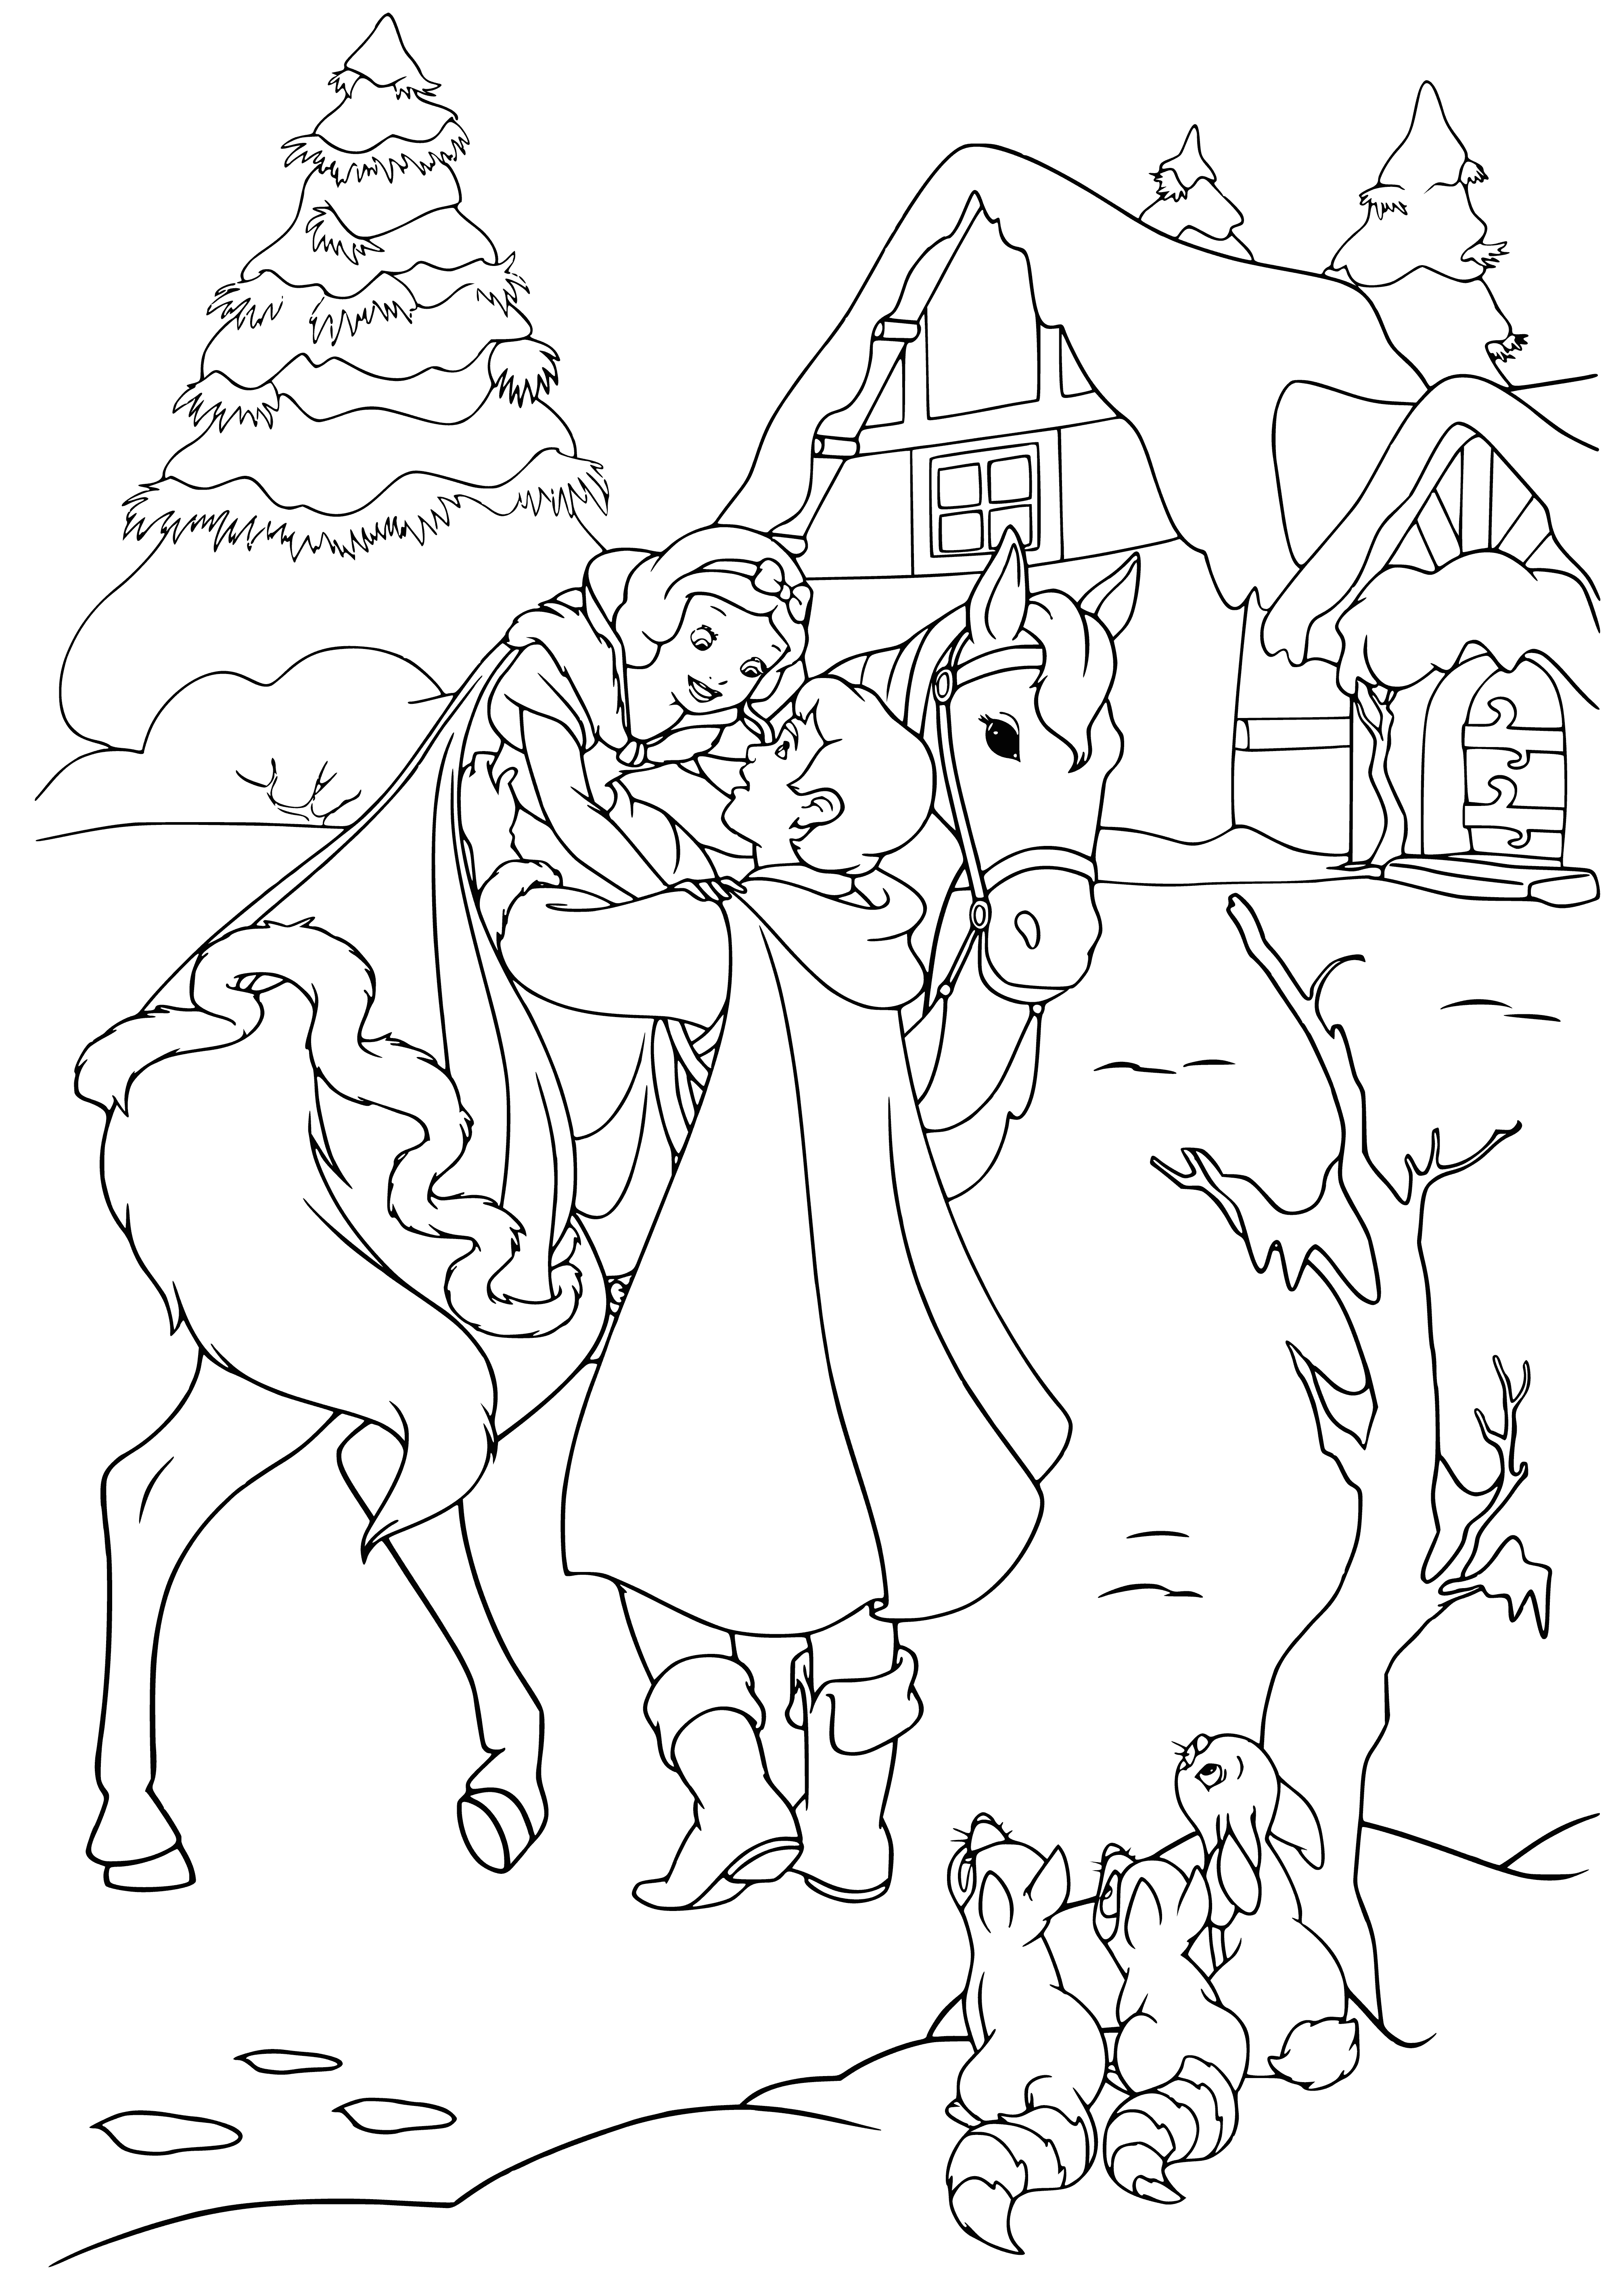 coloring page: Disney princesses celebrate New Year in winter forest w/ Snow White & prince surrounded by happy animal friends.